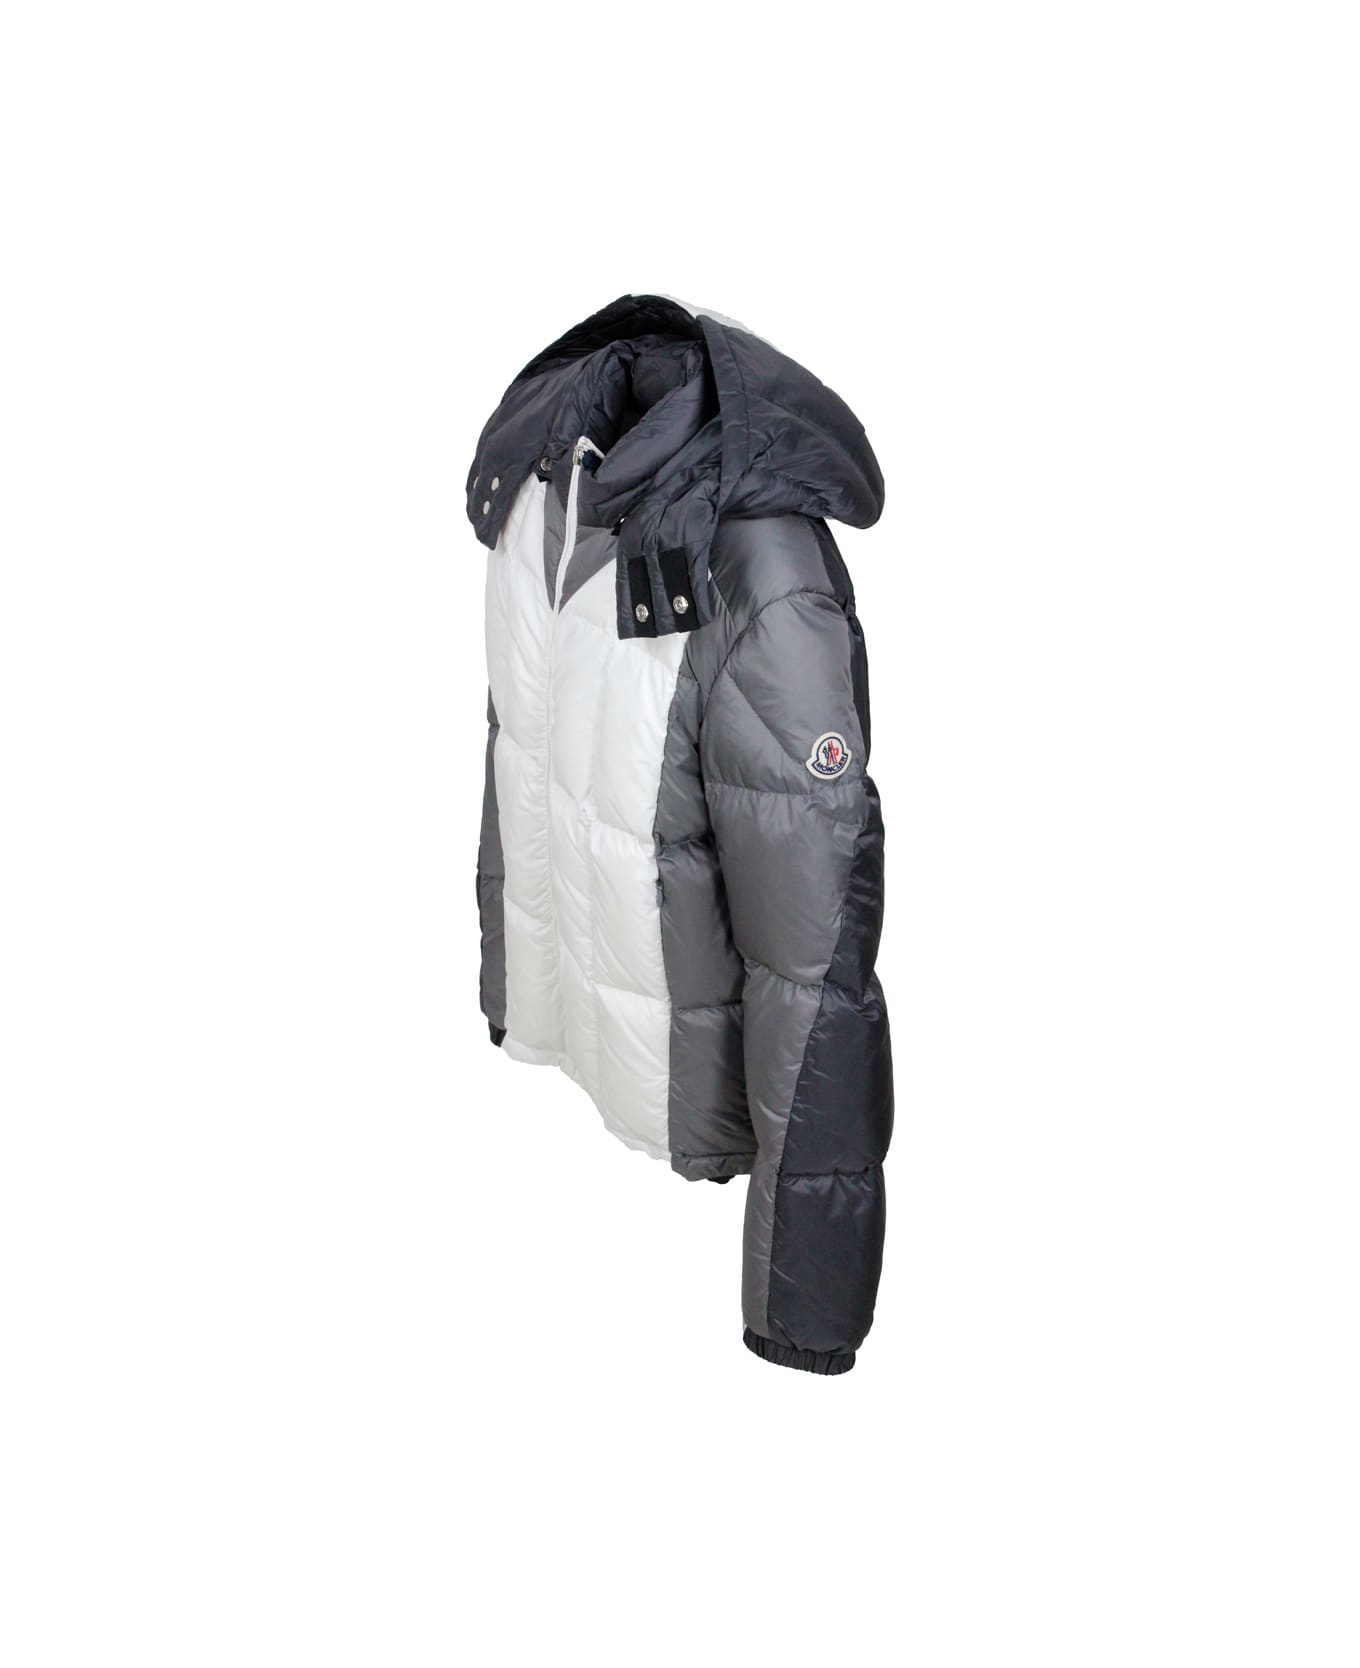 Moncler Down Jacket 100 Grams Alifhotes With Detachable Hood And Writing On The Hood - Grey コート＆ジャケット